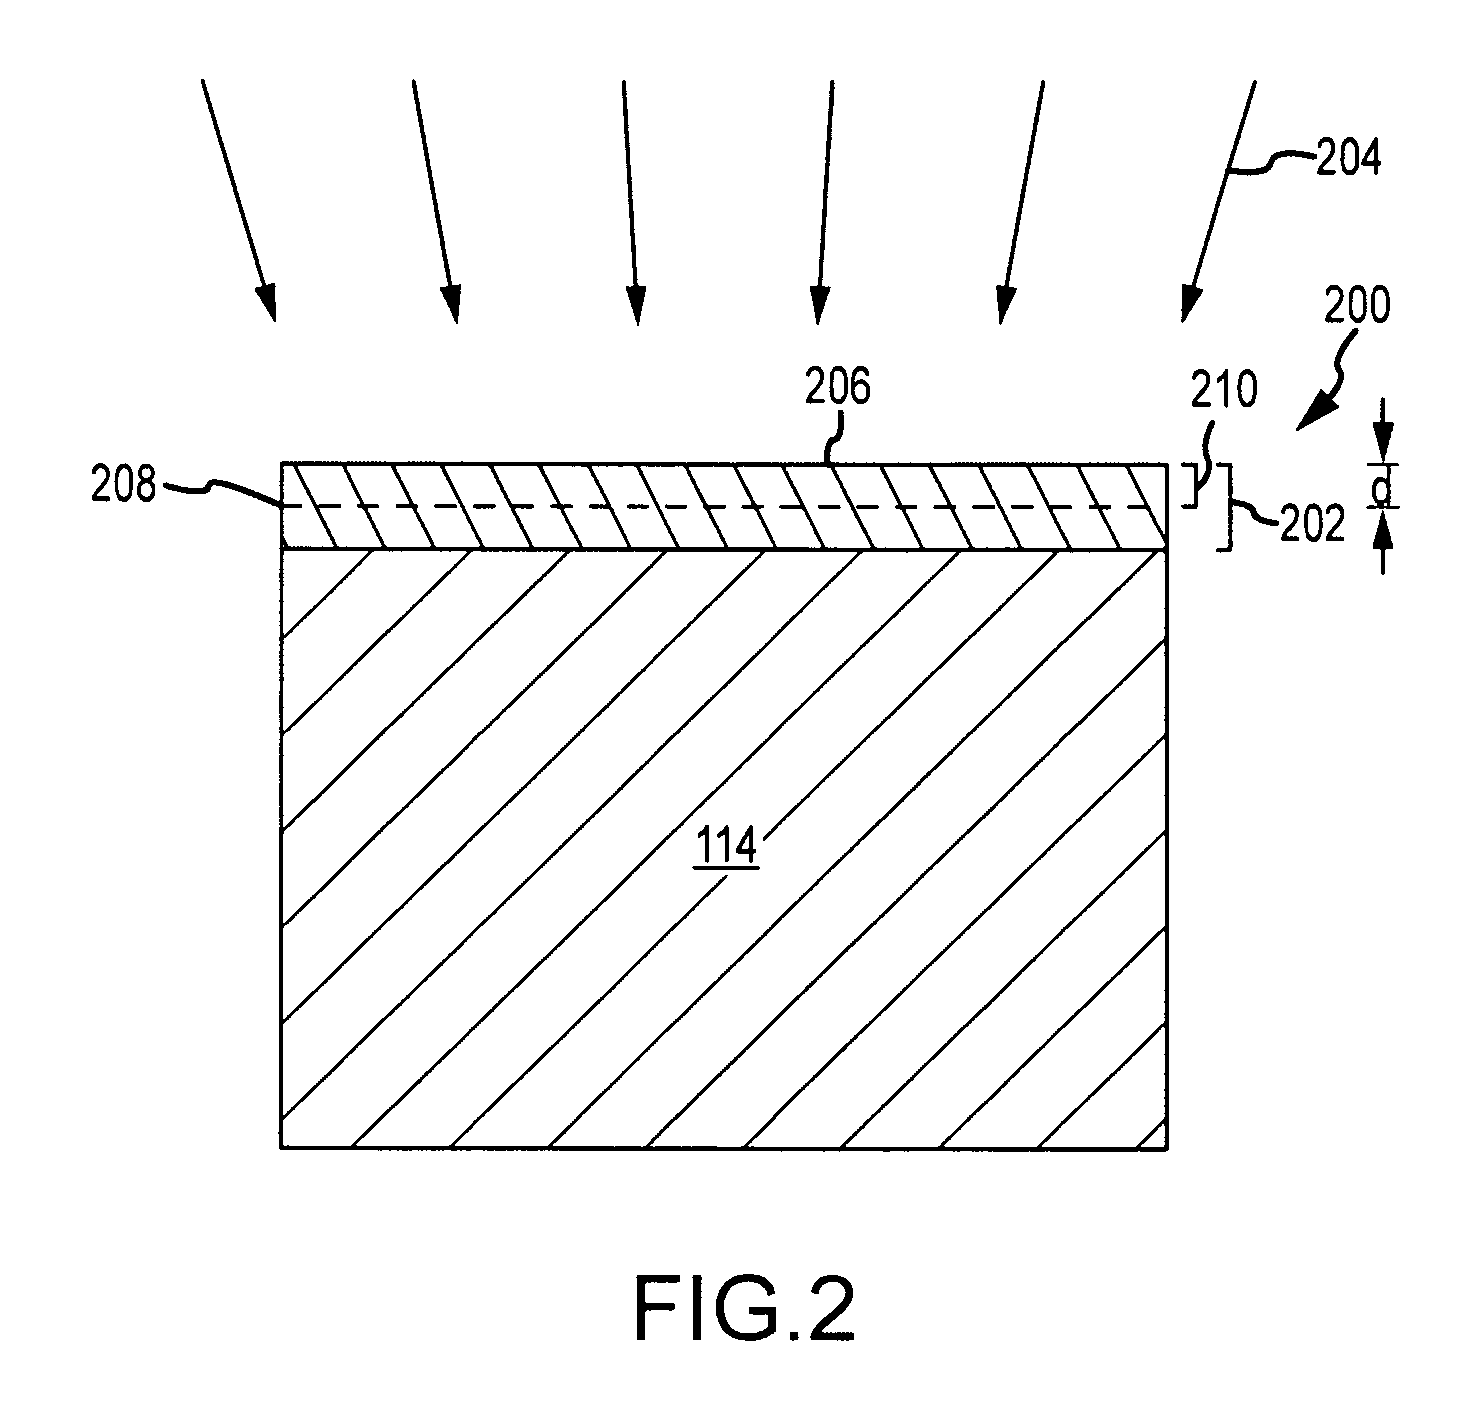 Polycrystalline diamond compact, methods of fabricating same, and applications therefor